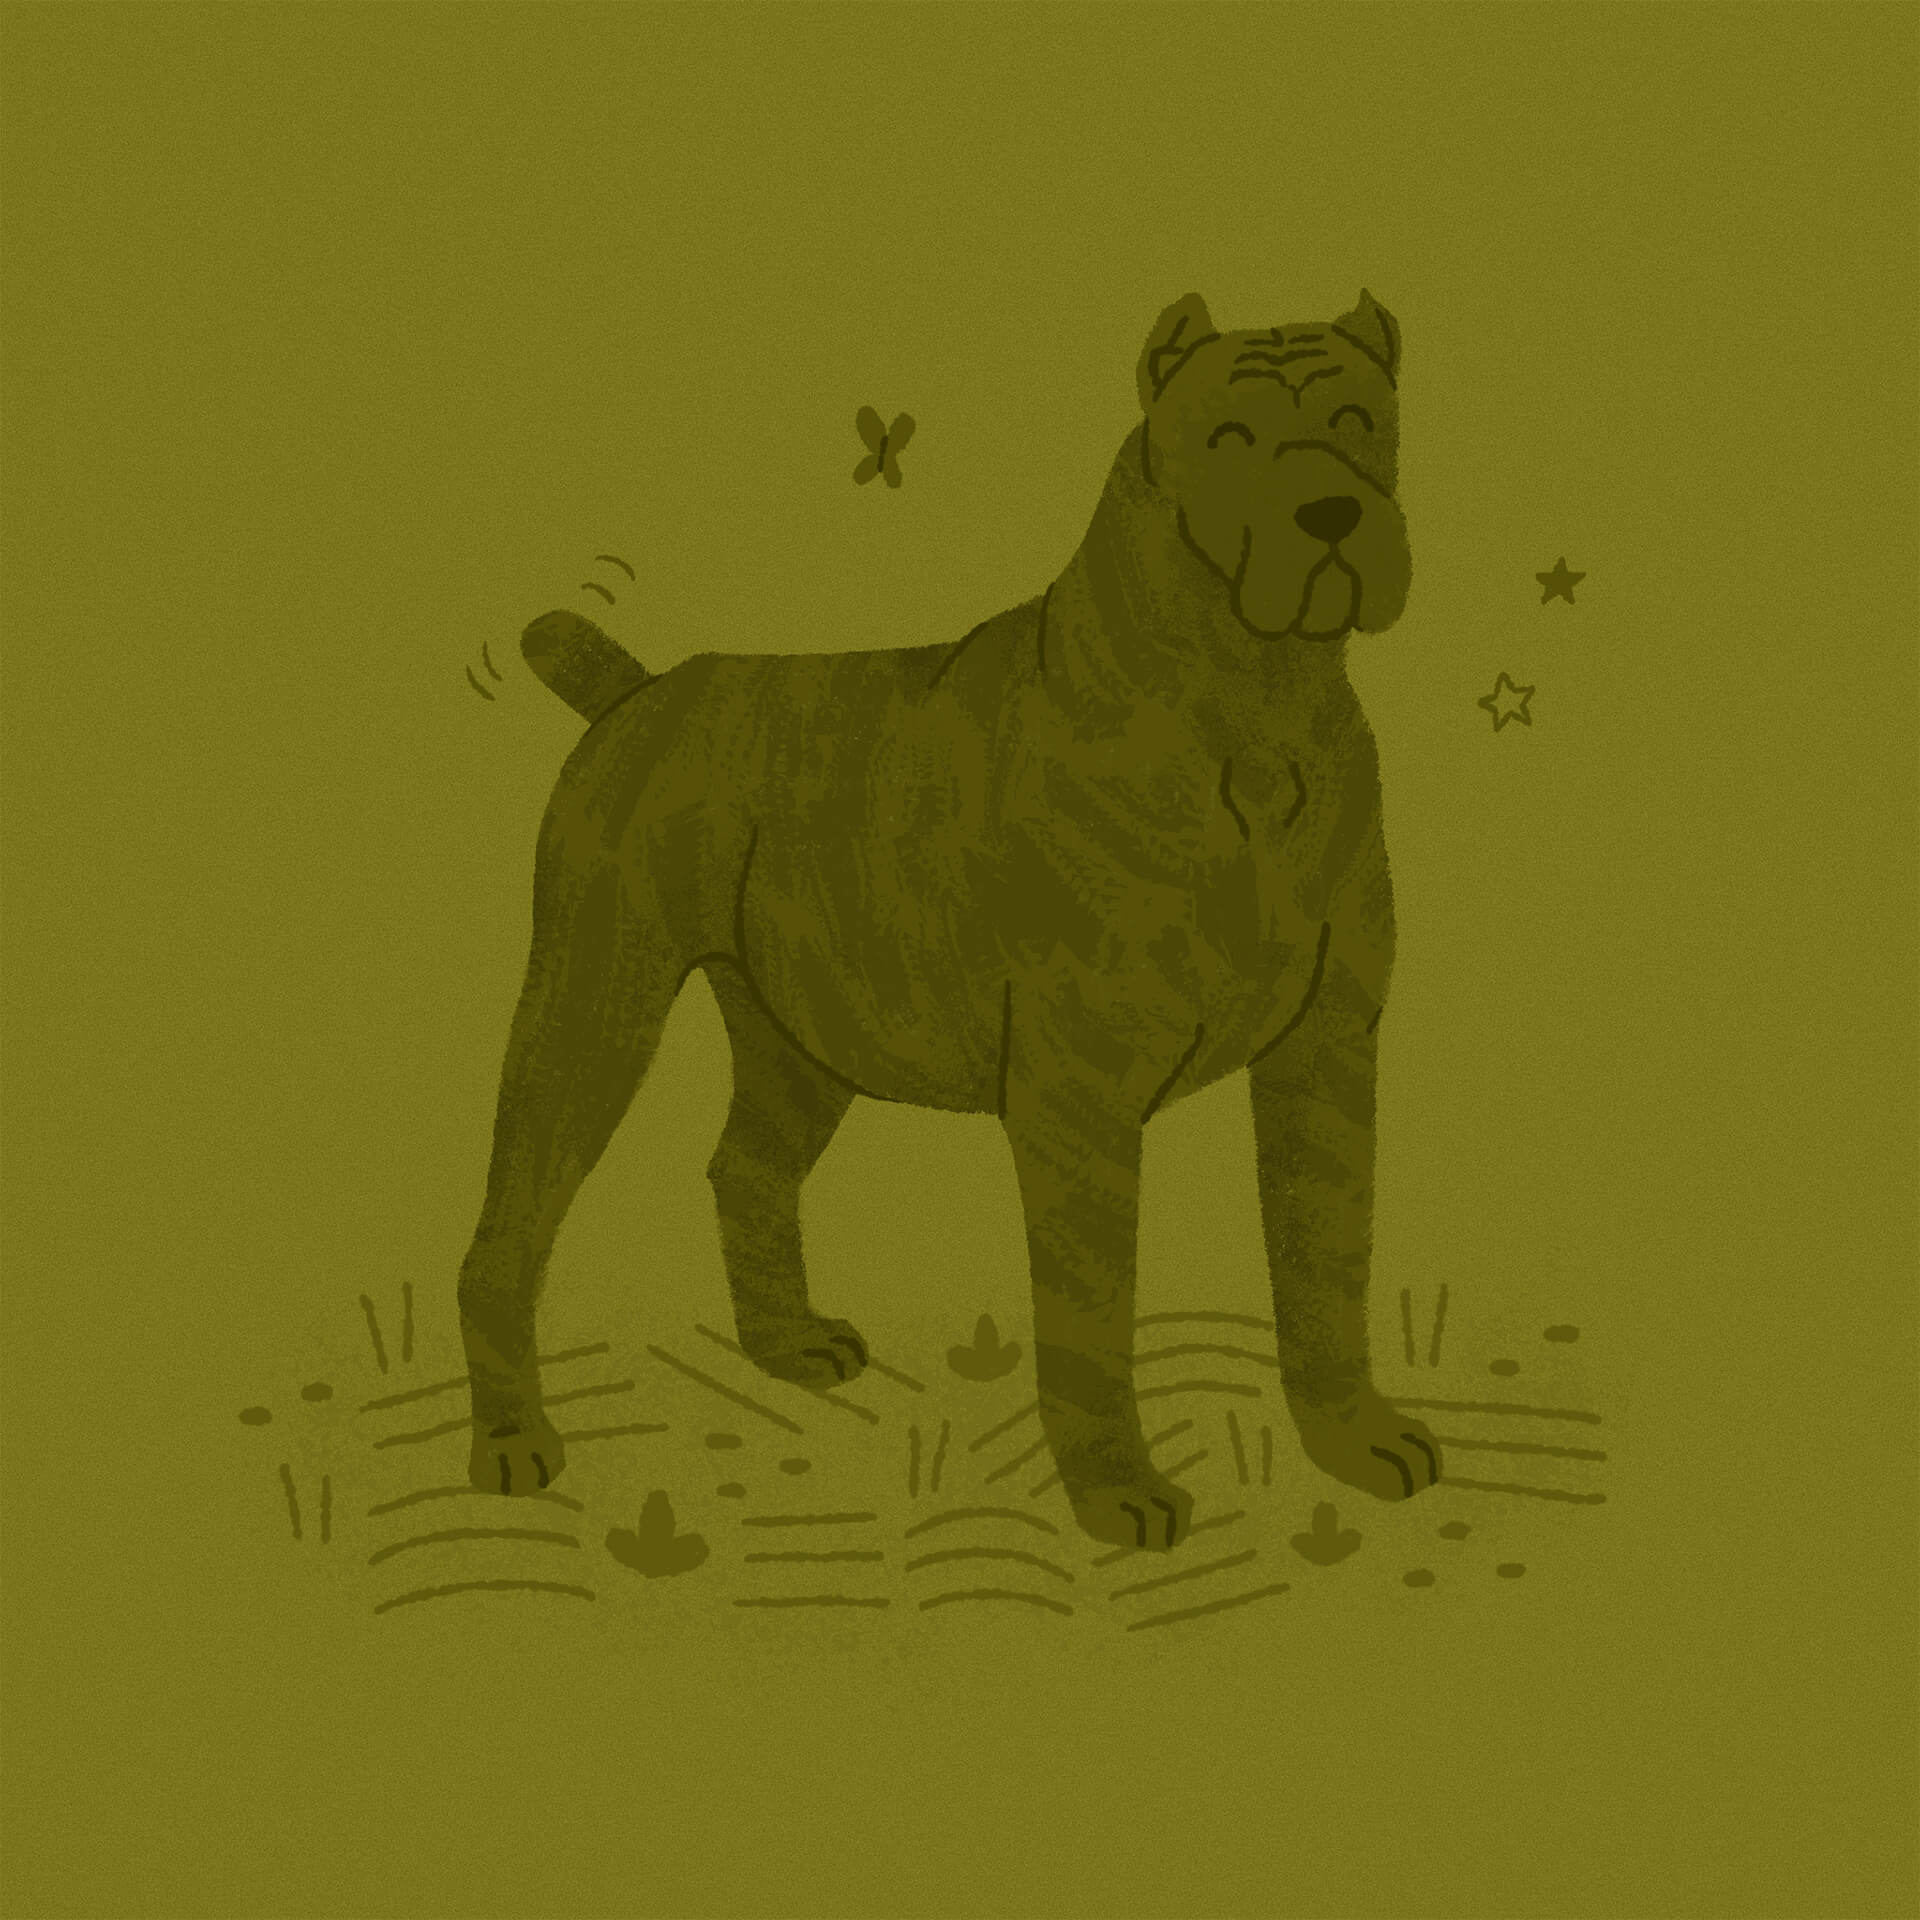 An illustration of a green cane corso dog smiling with butterflies around it